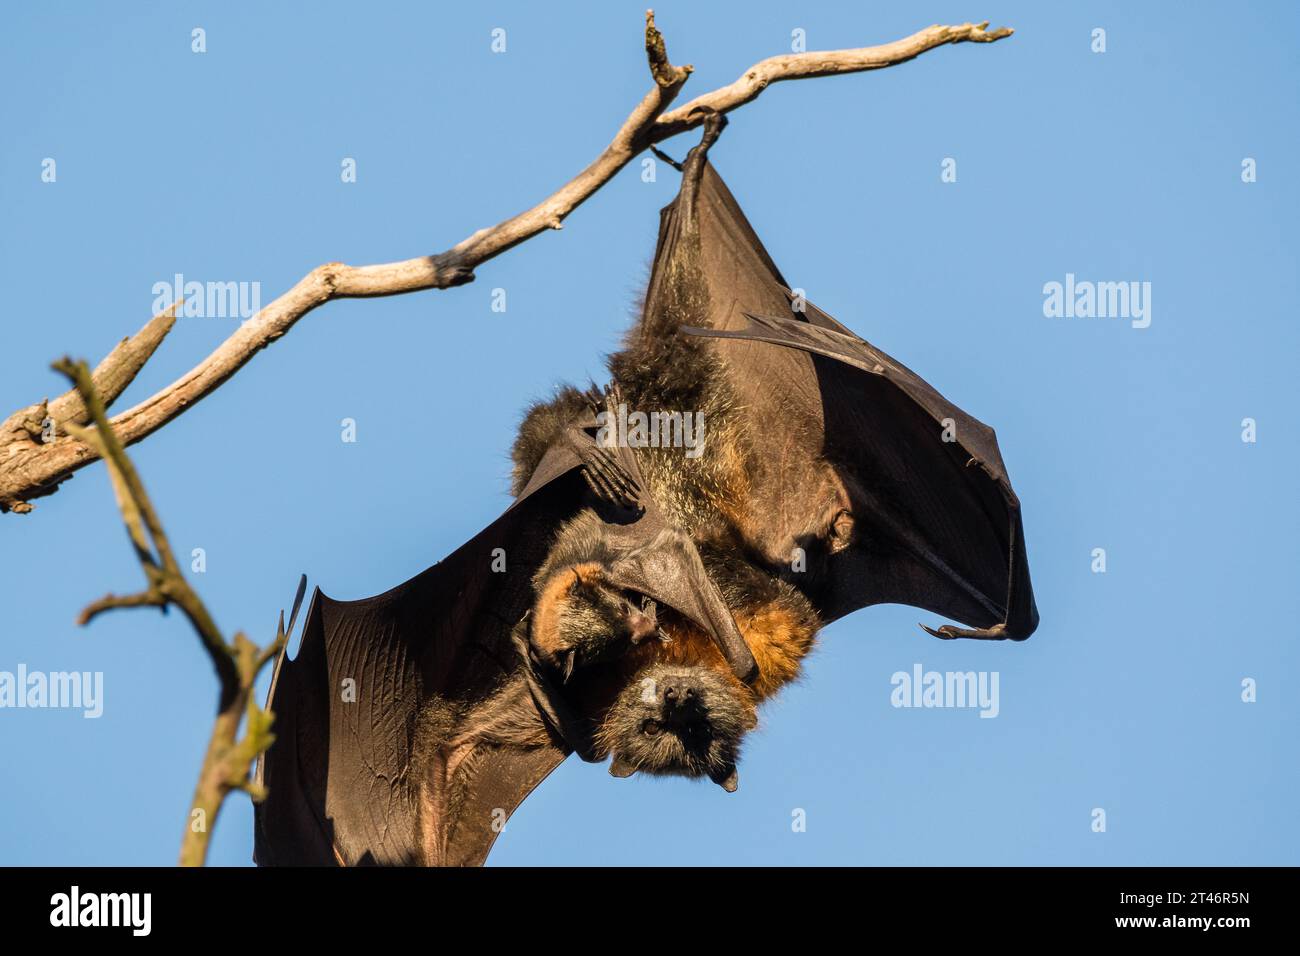 Grey-headed flying fox, Pteropus poliocephalus, afternoon, hanging in tree, wings extended, holding her baby, Yarra Bend Park, Melbourne Stock Photo